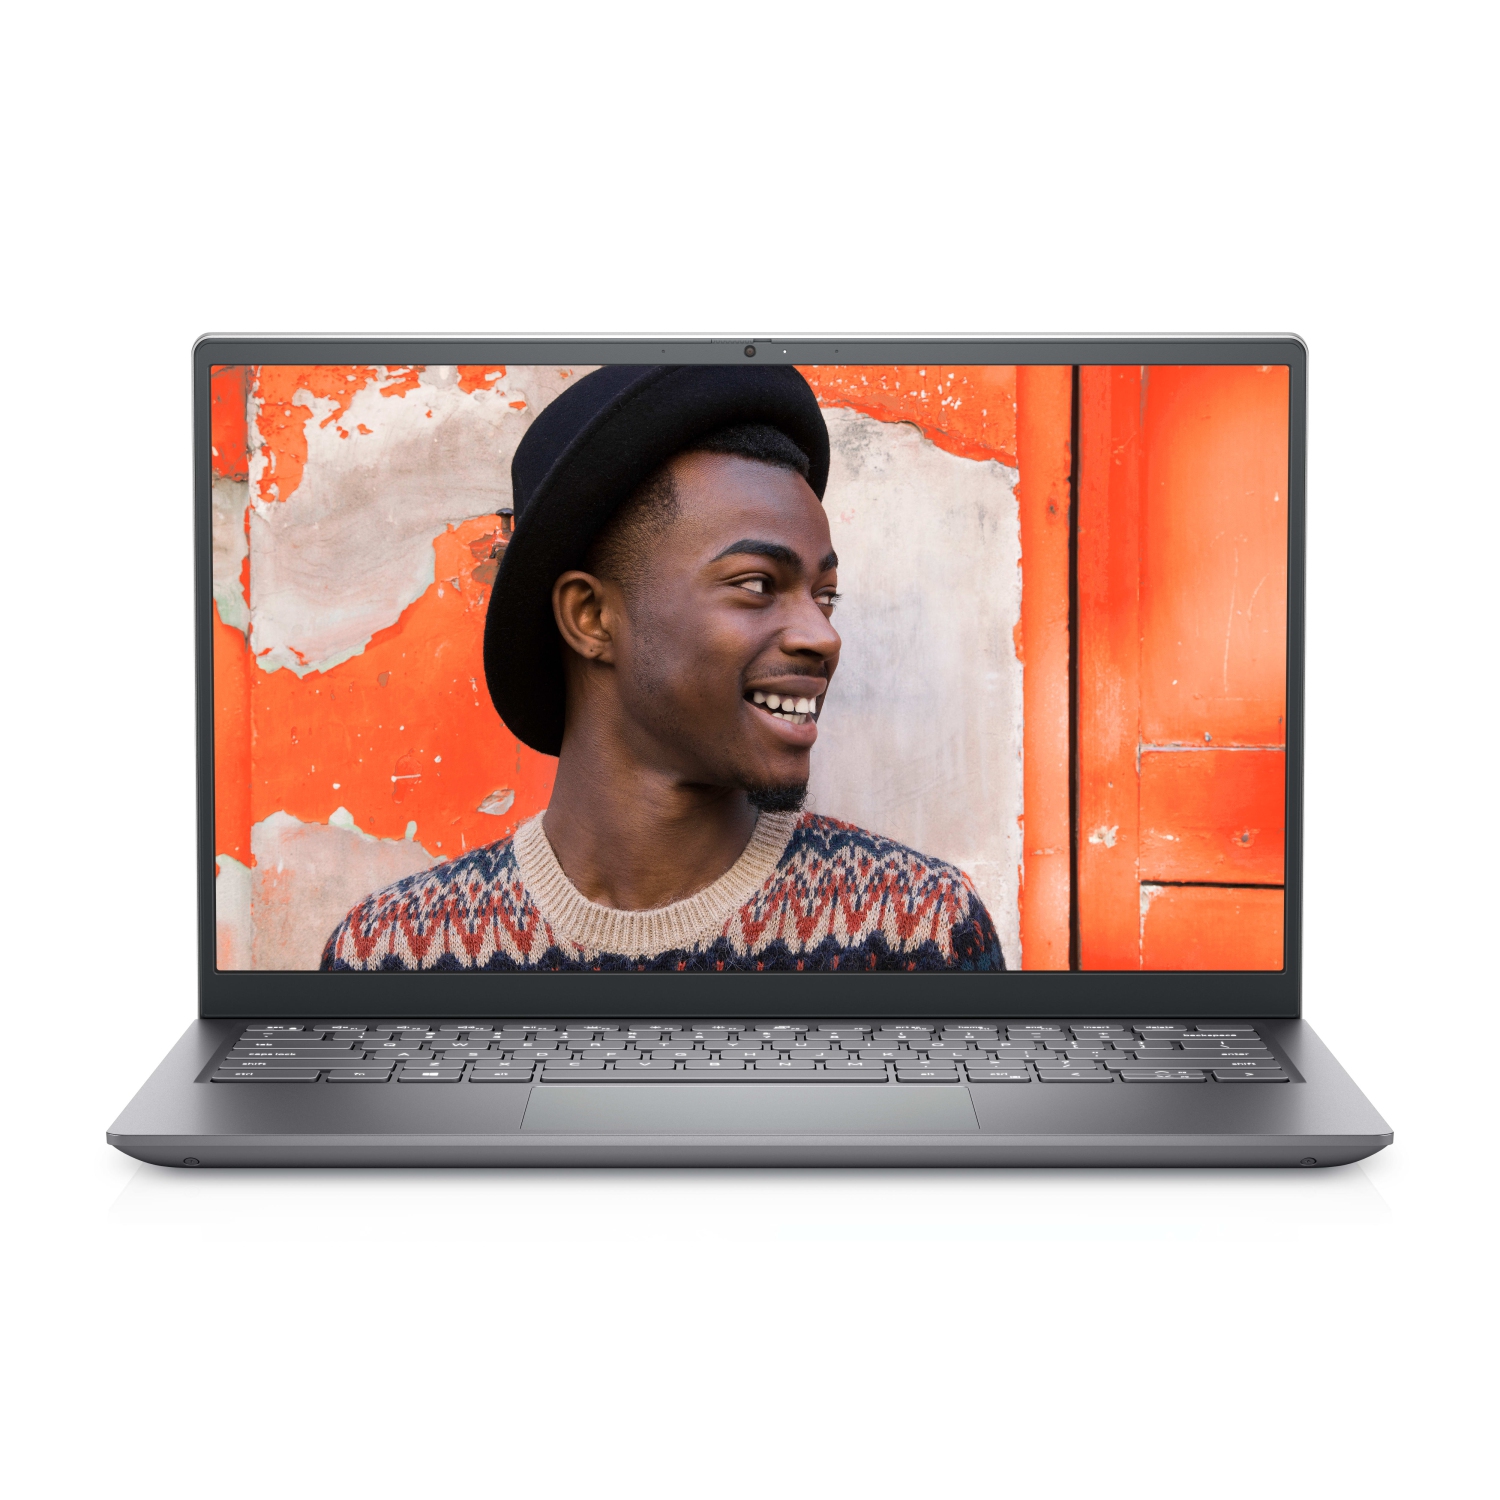 Dell Inspiron 14 5410 Laptop (2021) | 14" FHD | Core i7 - 512GB SSD - 16GB RAM | 4 Cores @ 5 GHz - 11th Gen CPU Certified Refurbished